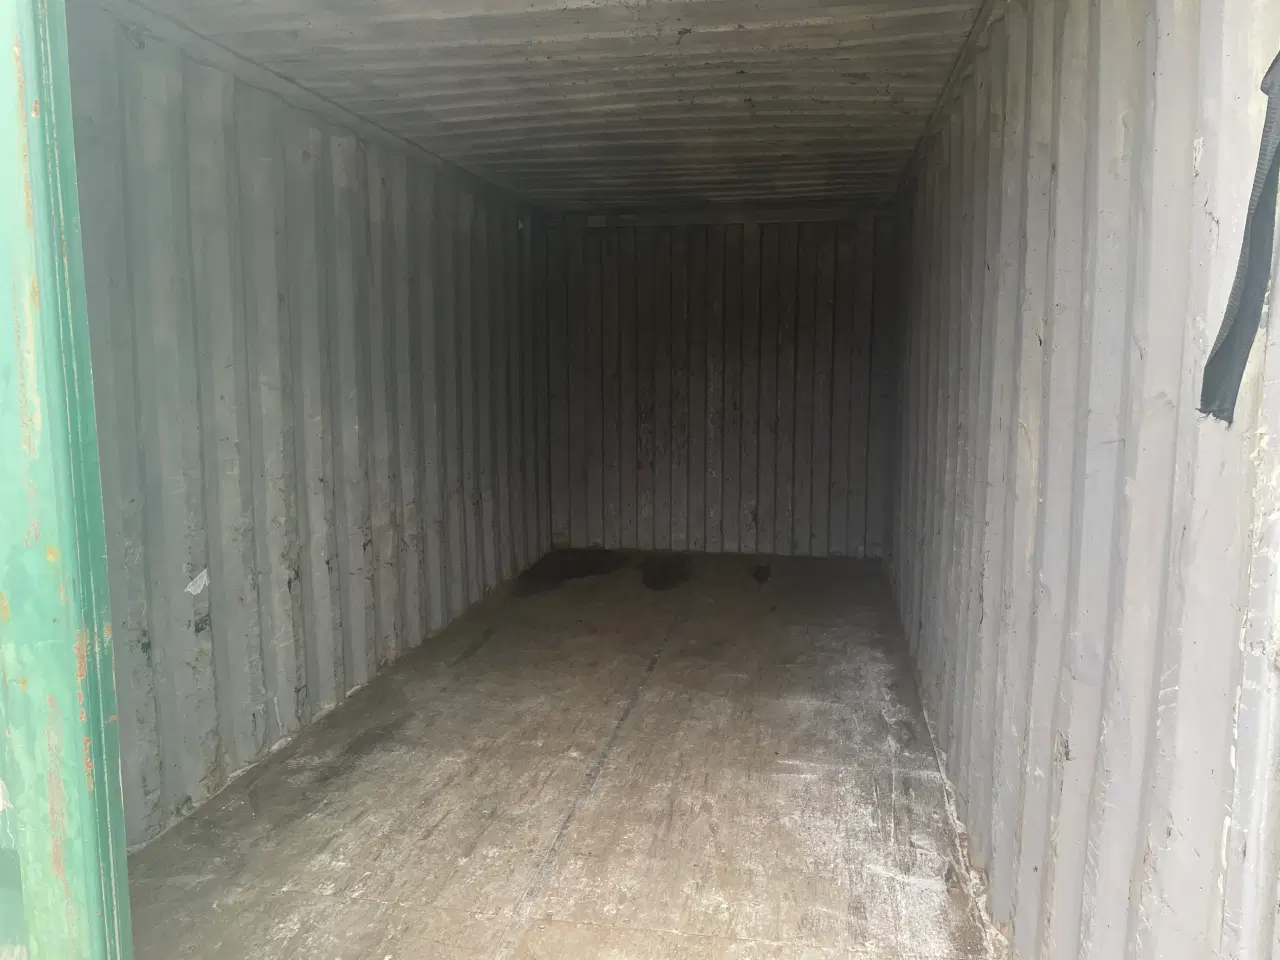 Billede 2 - 20 fods Container - ID: CLHU 3167499